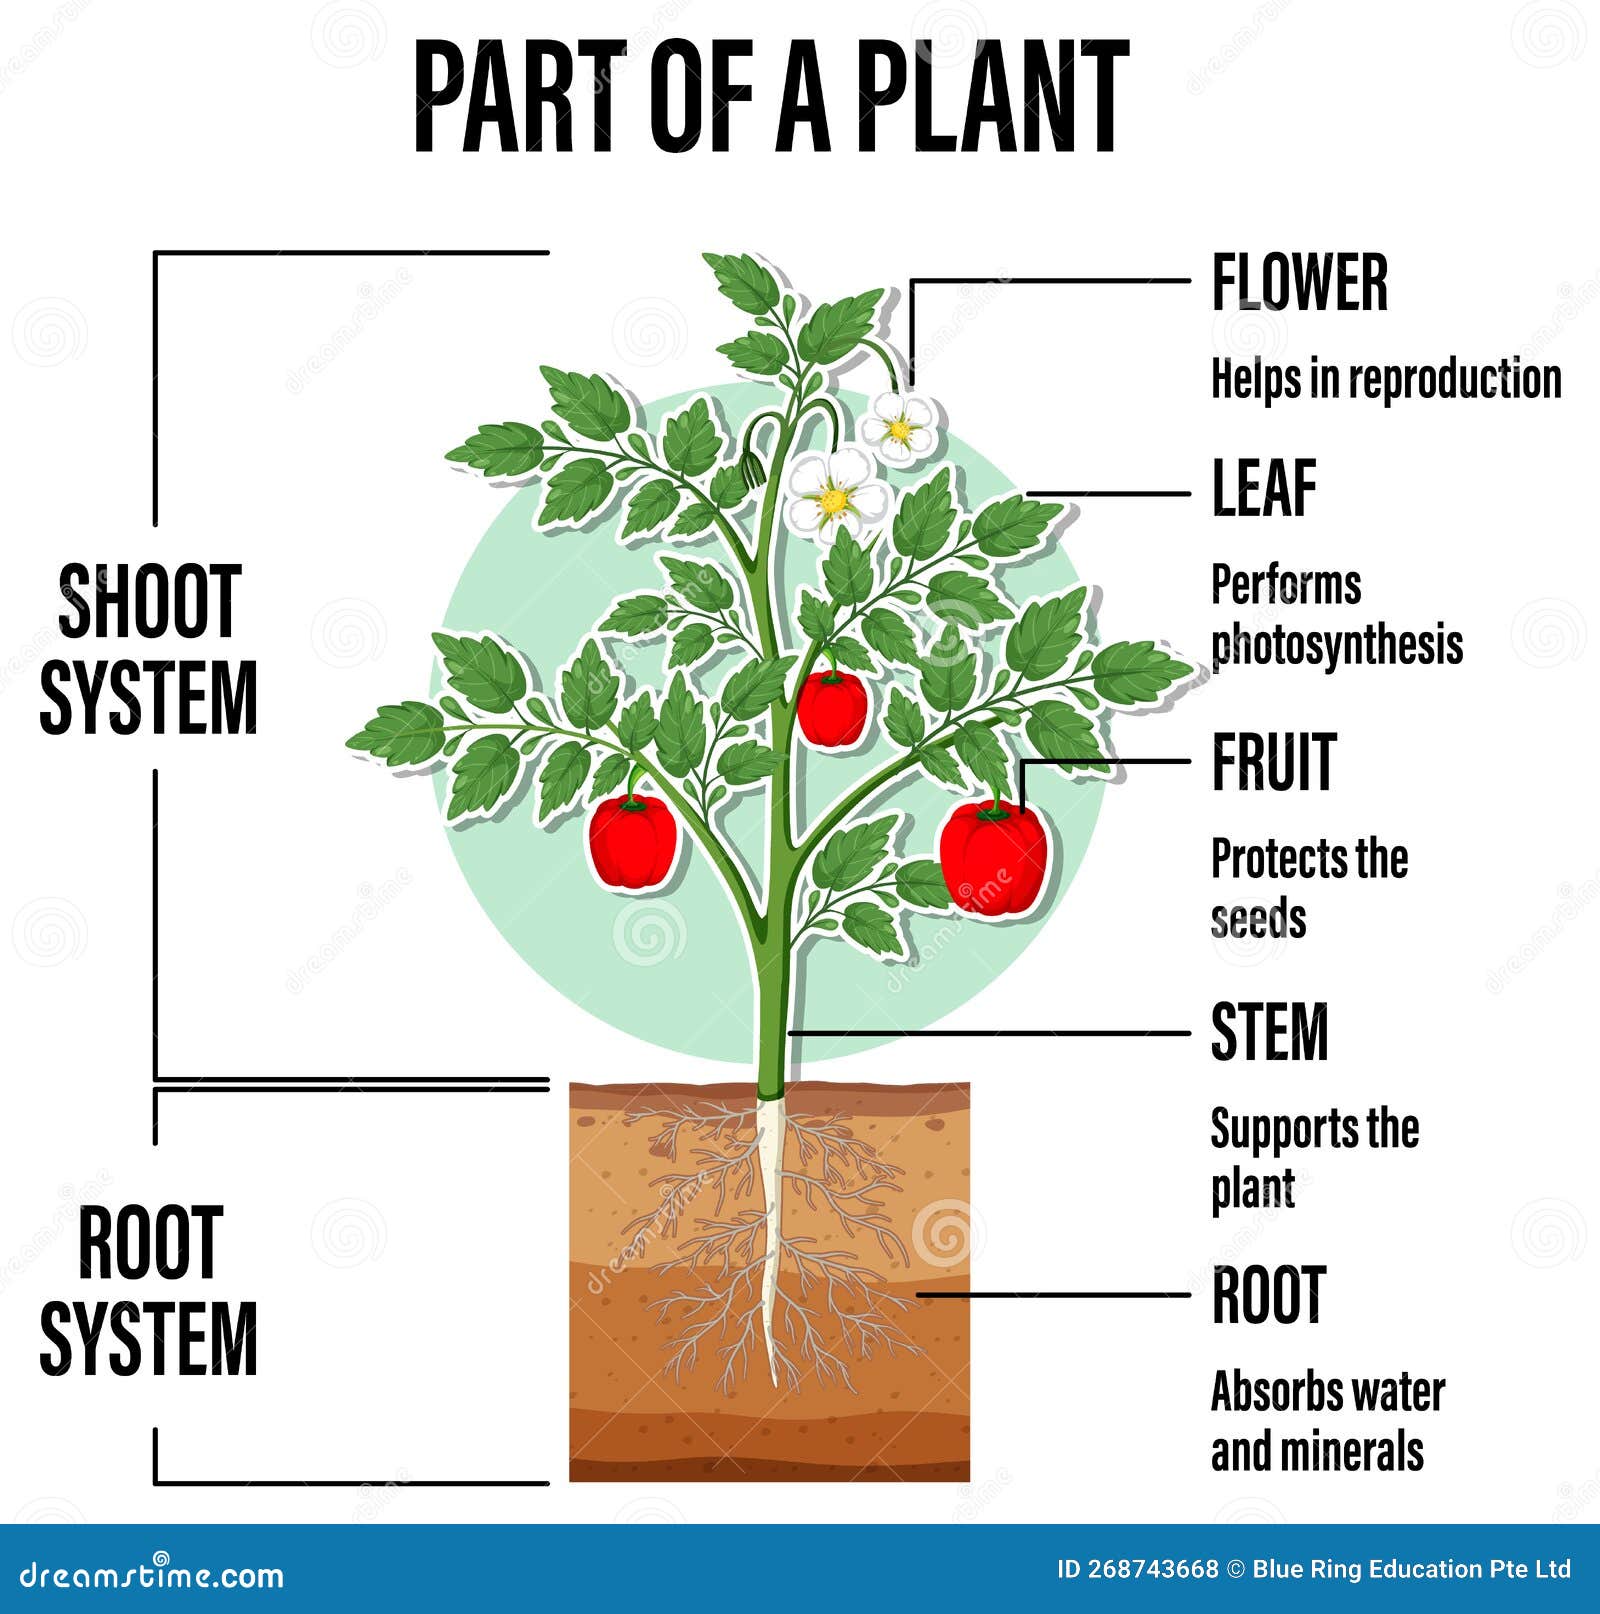 draw a diagram showing different edible parts of plants​ - Brainly.in